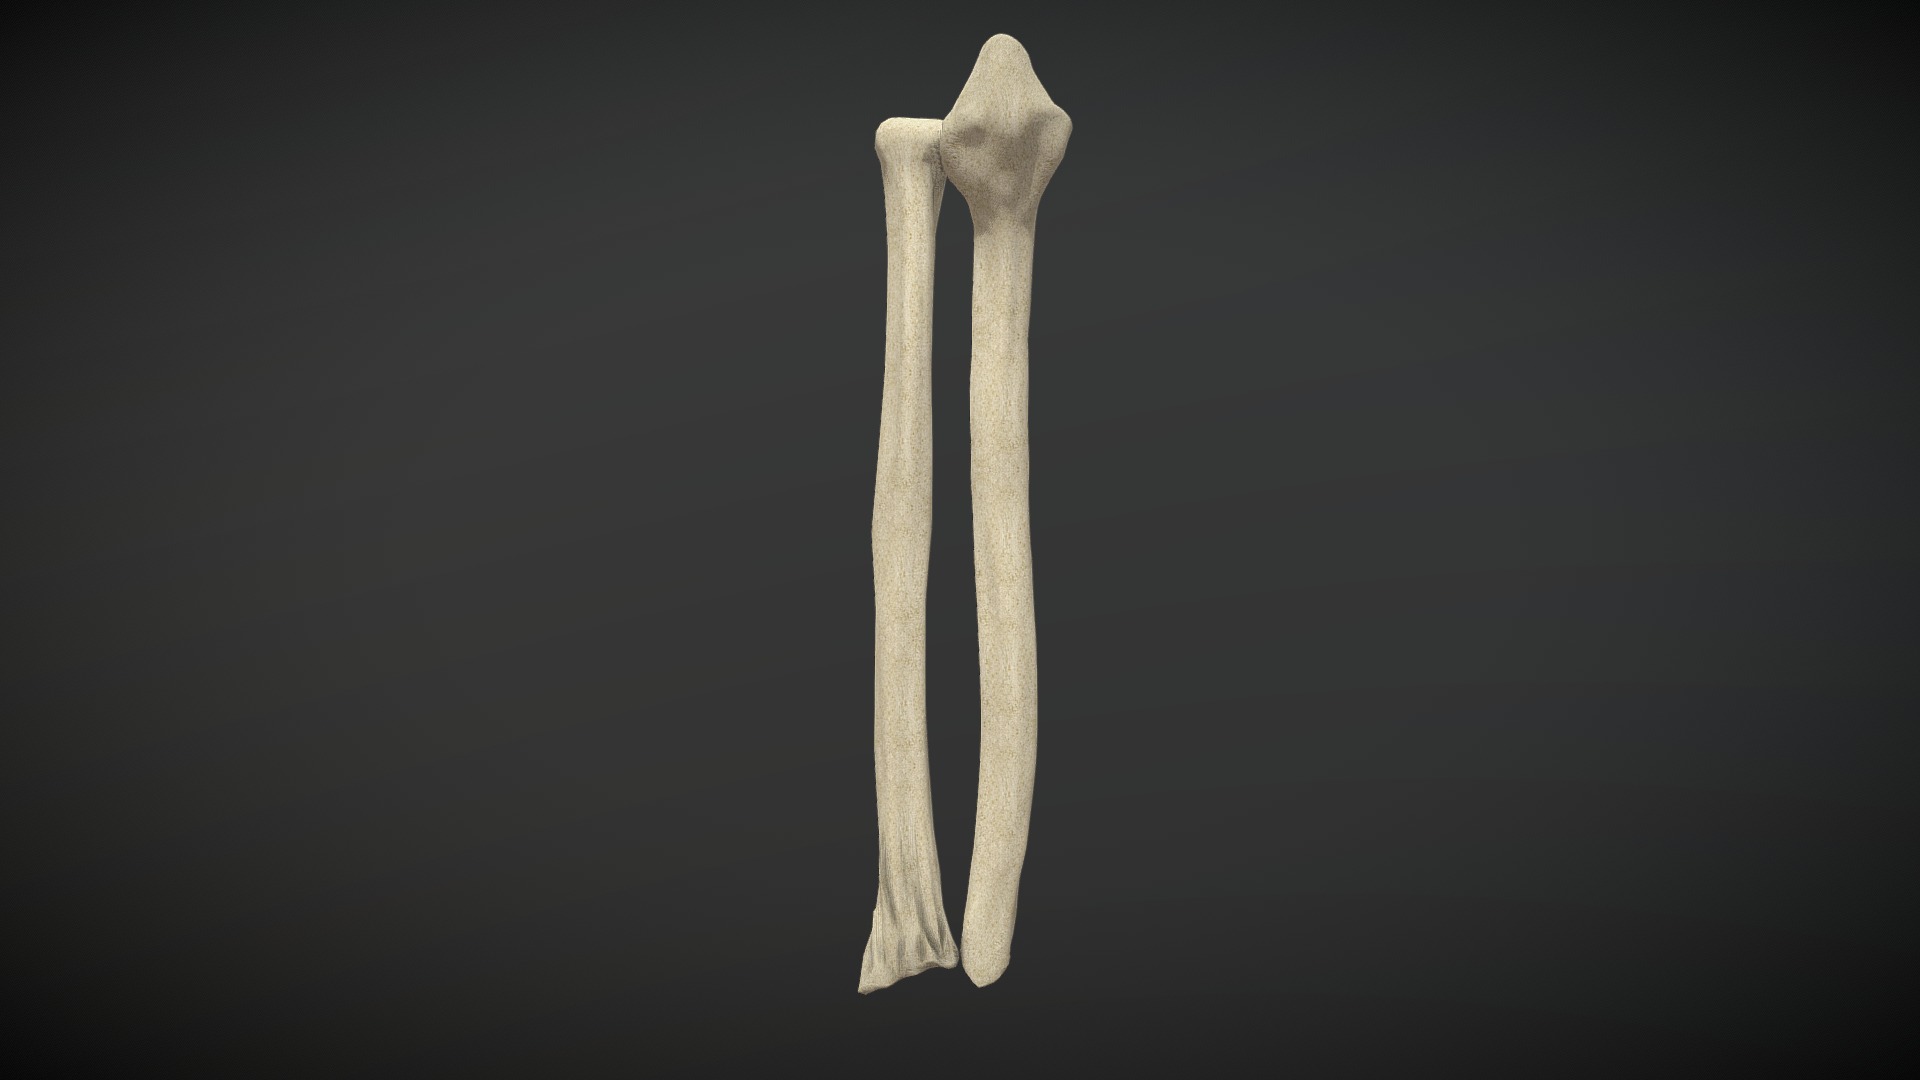 3D model Ulna and Radius / Cubito y Radio - This is a 3D model of the Ulna and Radius / Cubito y Radio. The 3D model is about a close-up of a bone.